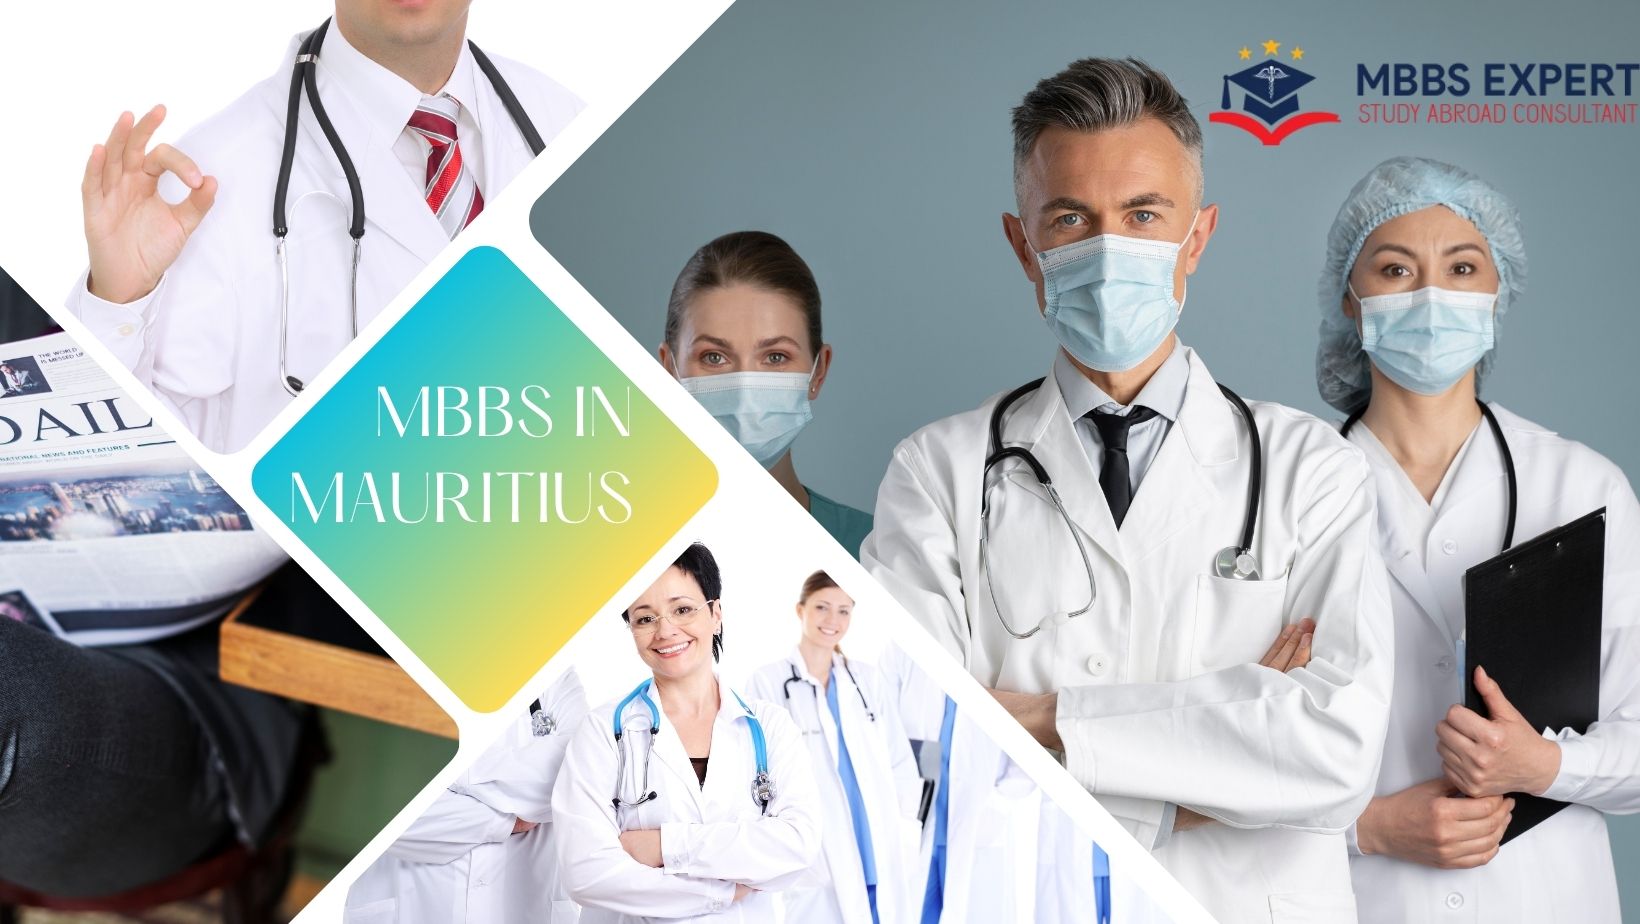 MBBS IN MAURITIUS